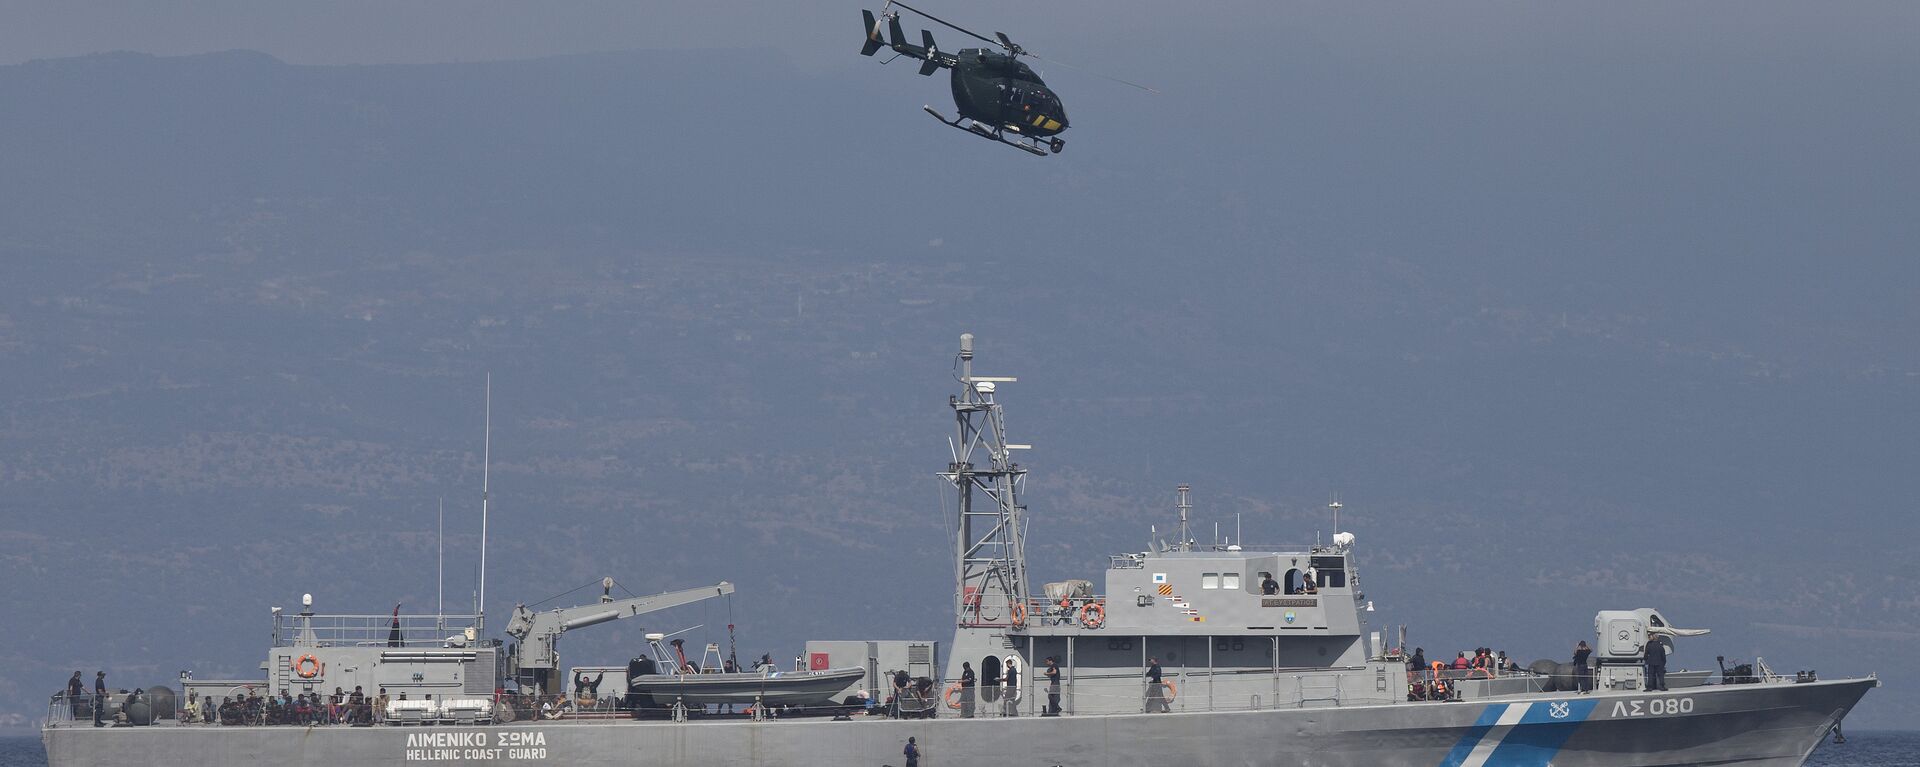 A small inflatable dinghy with a suspected smuggler on board is stopped by a Greek coastguard patrol boat, carrying migrants rescued at sea, as a helicopter from the European border control agency Frontex flies overhead, off Greece’s eastern Aegean Sea island of Lesbos on Thursday, Sept. 24, 2015 - Sputnik Türkiye, 1920, 04.05.2022